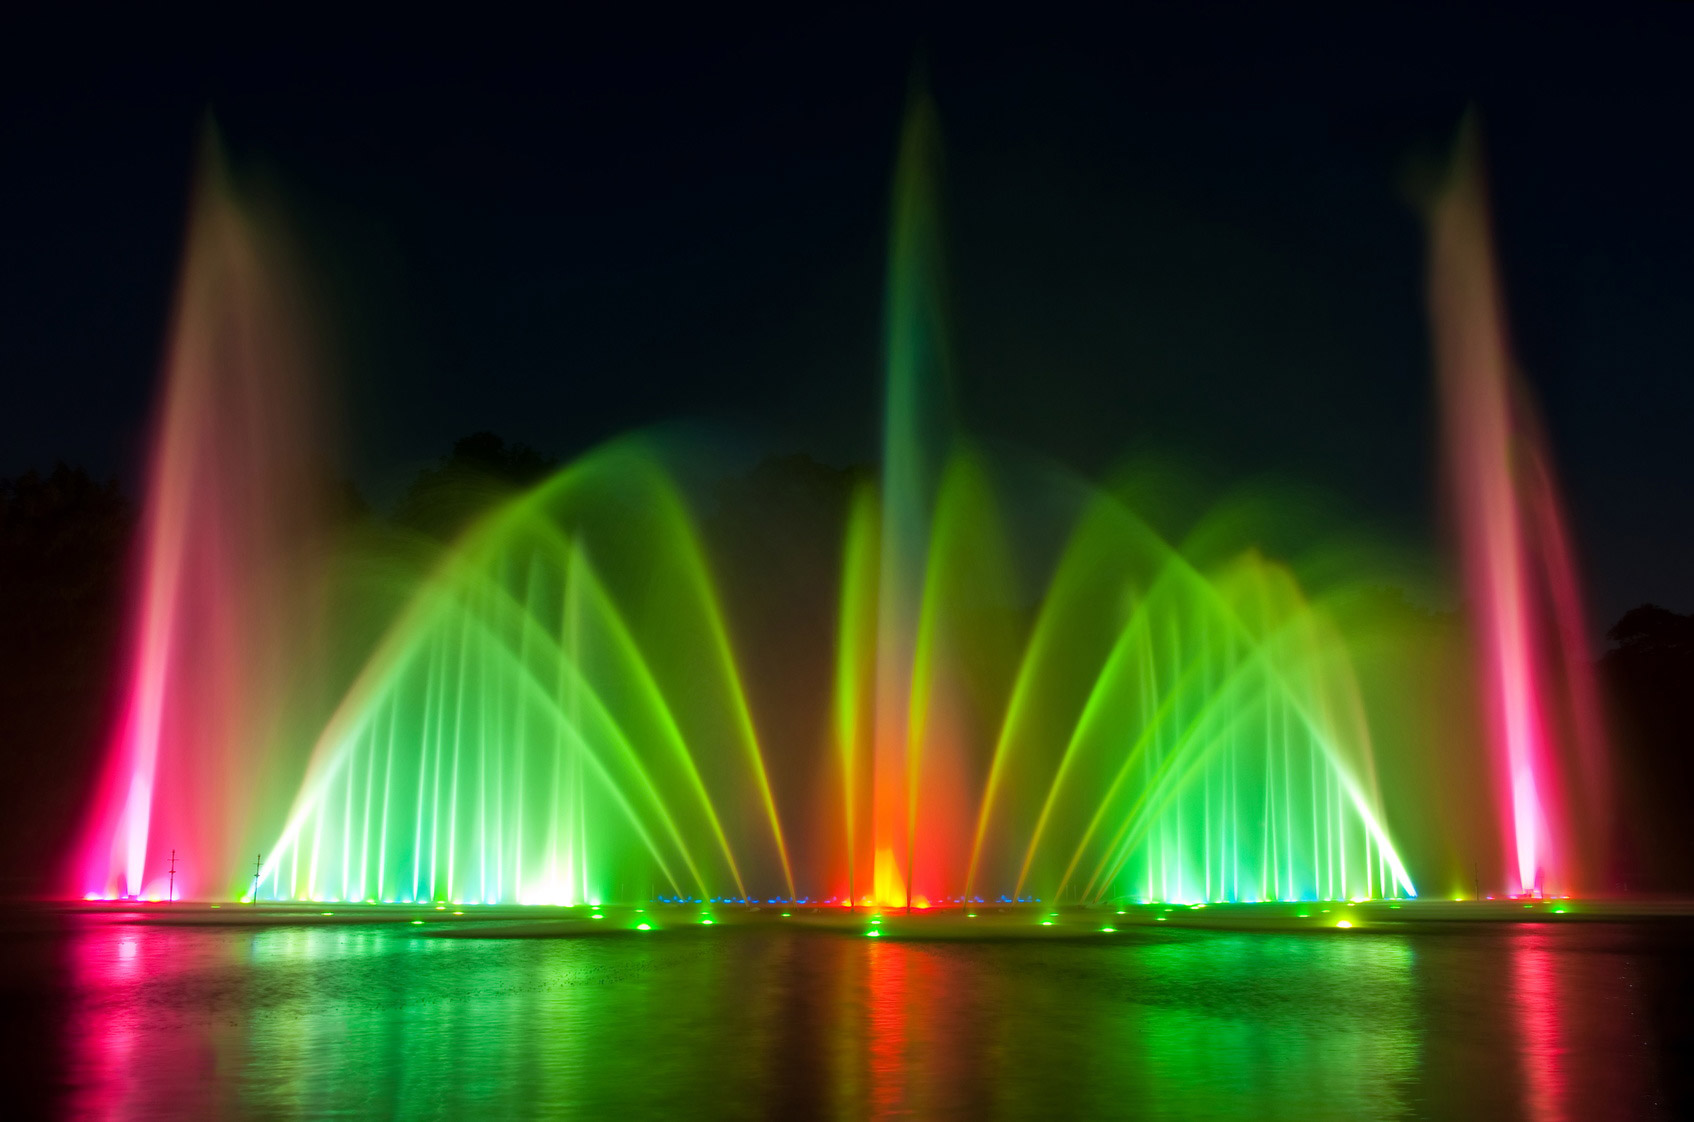 Light Show over the water with green and red lights